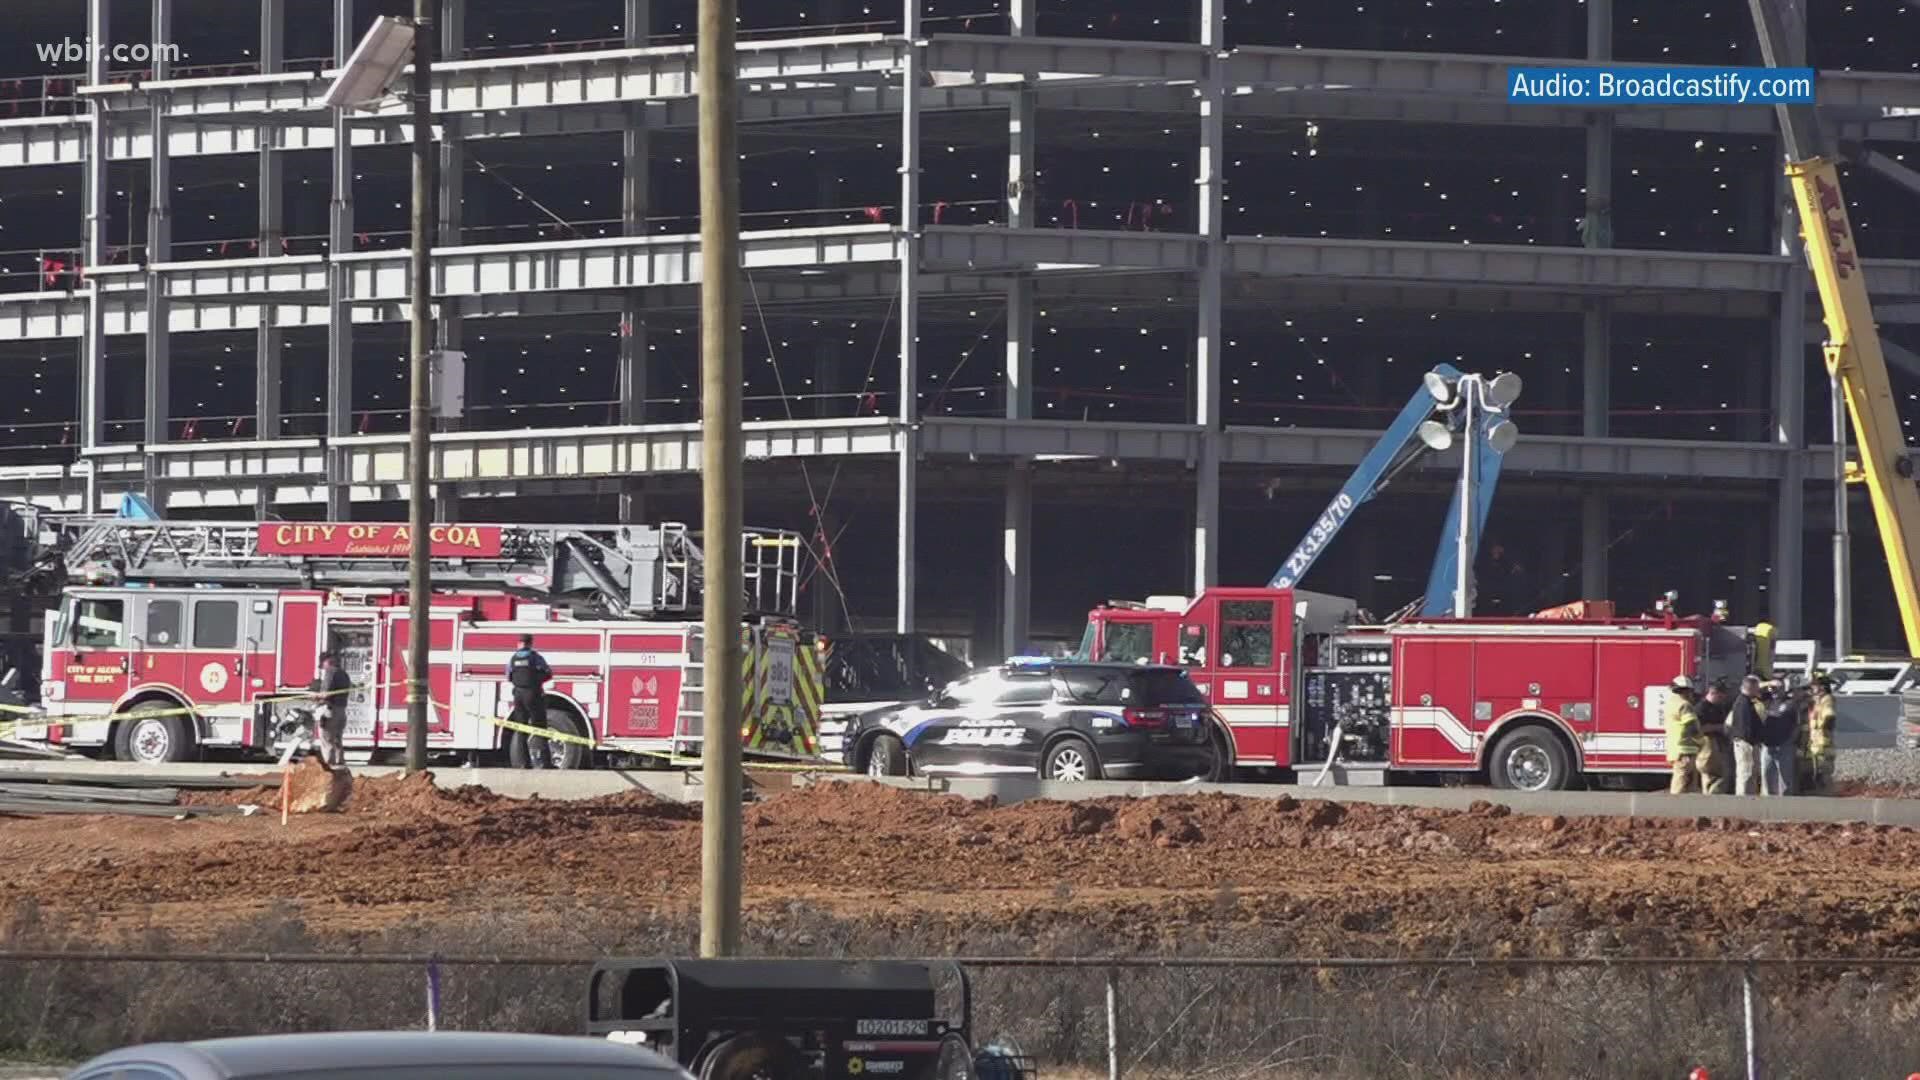 The FAA said one person died and another is was in serious condition after the small plane crashed into a construction site in Blount County last week.